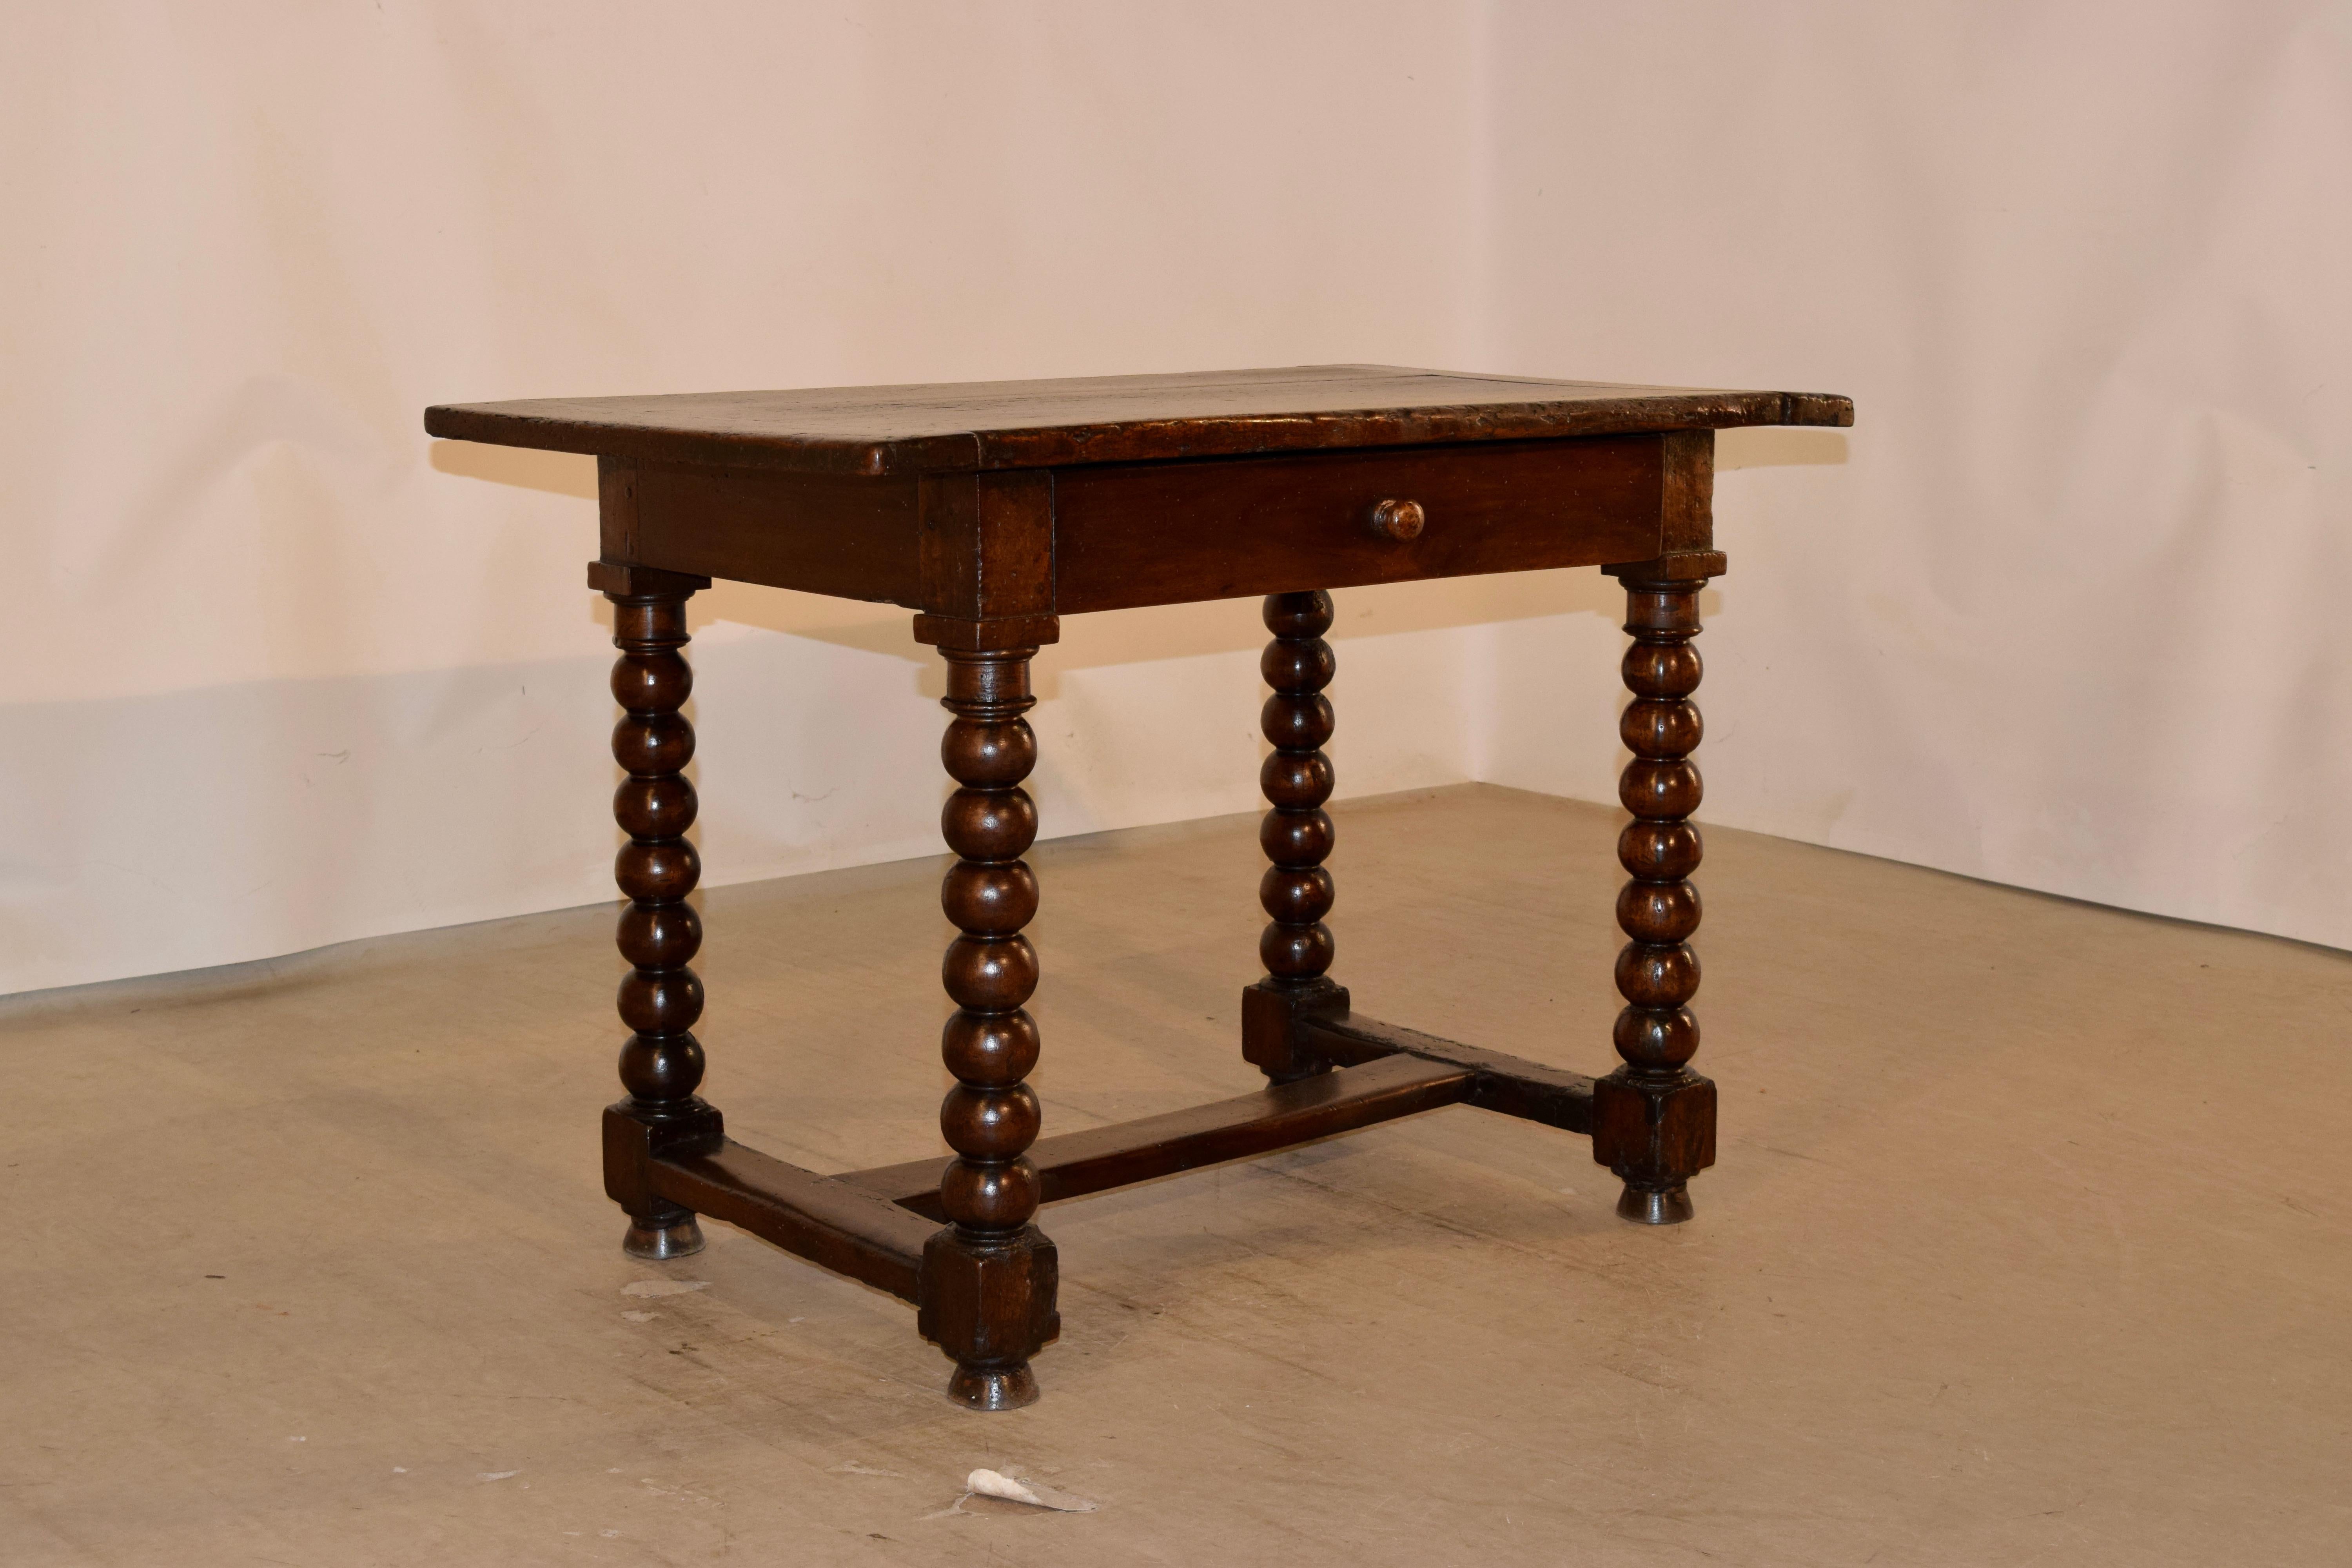 Mid-18th century walnut side table from France, with a banded top and simple apron, containing a single drawer in the front. The legs are heavily hand turned bobbin style and are joined by wonderfully worn stretchers and supported on turned feet.